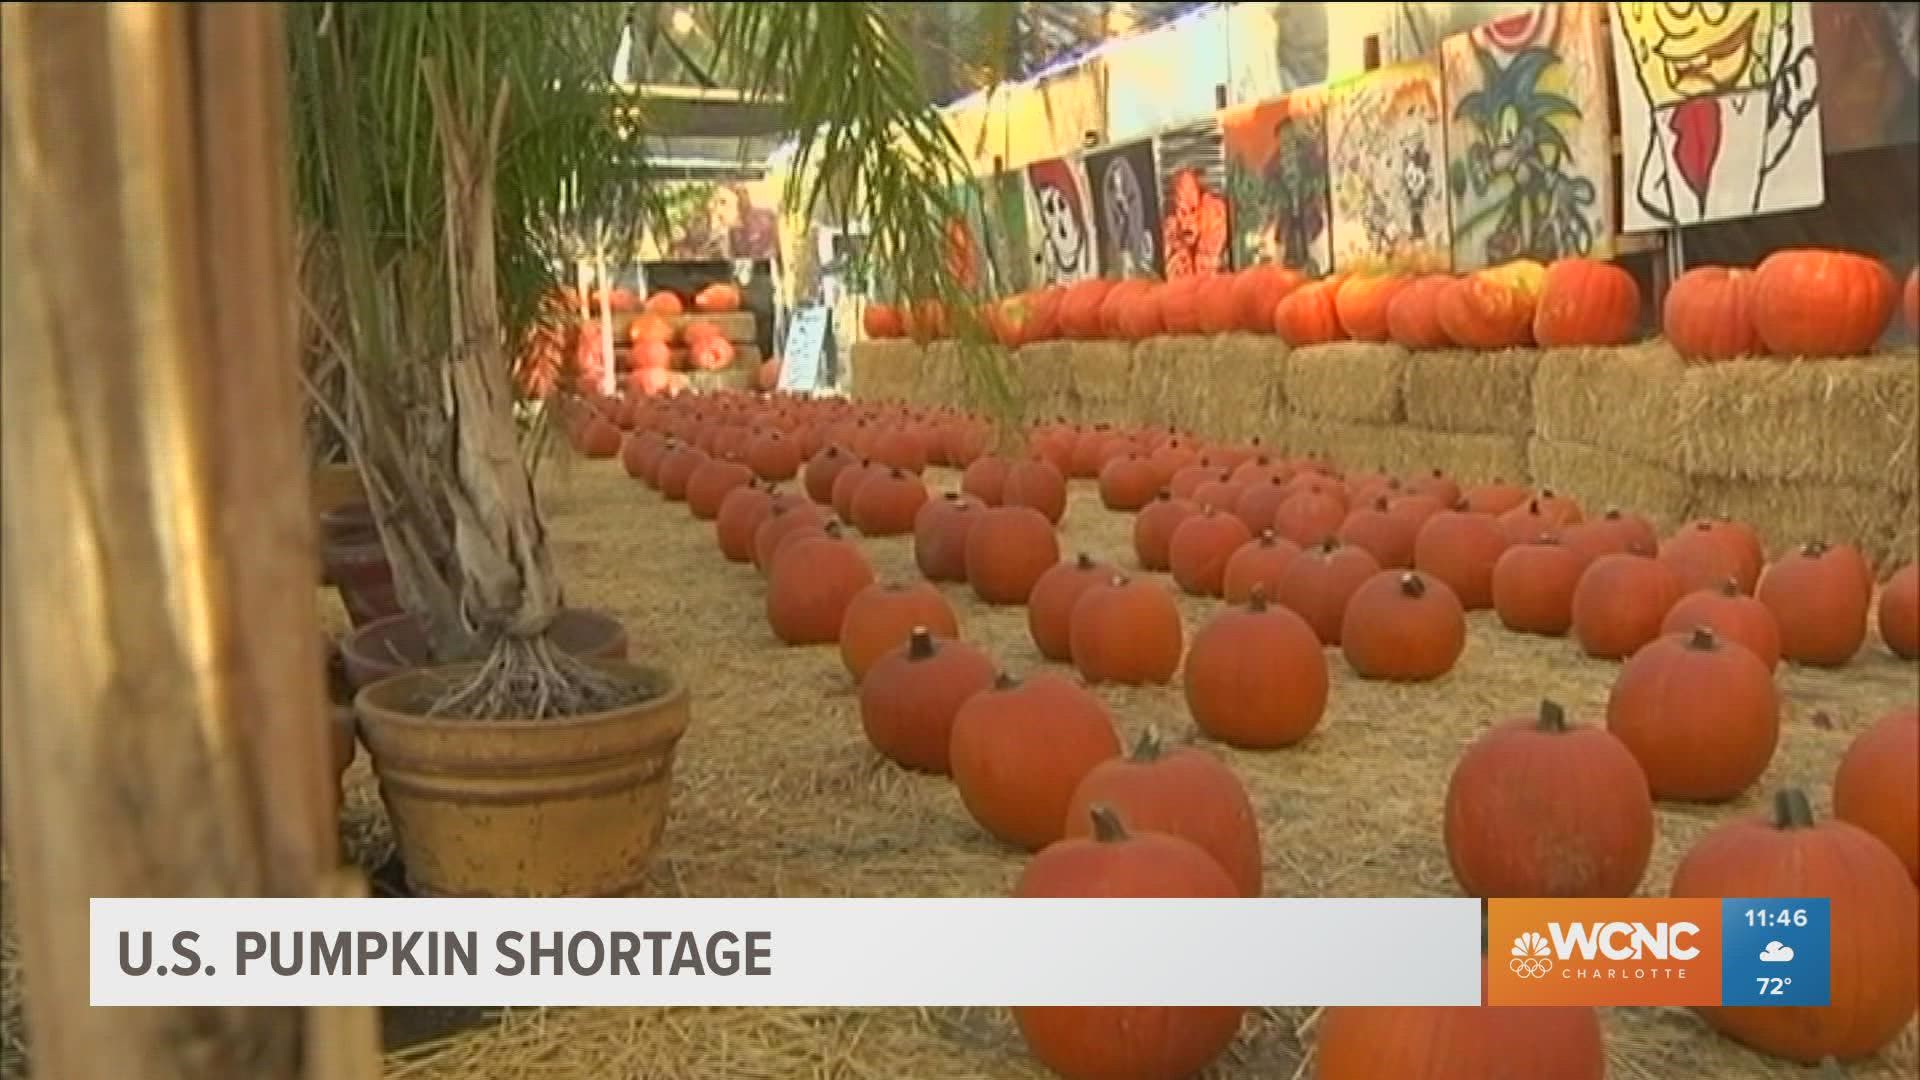 Extreme weather and shipping issues have led to a shortage of pumpkins this fall. Decent pumpkins could now cost more than ever.